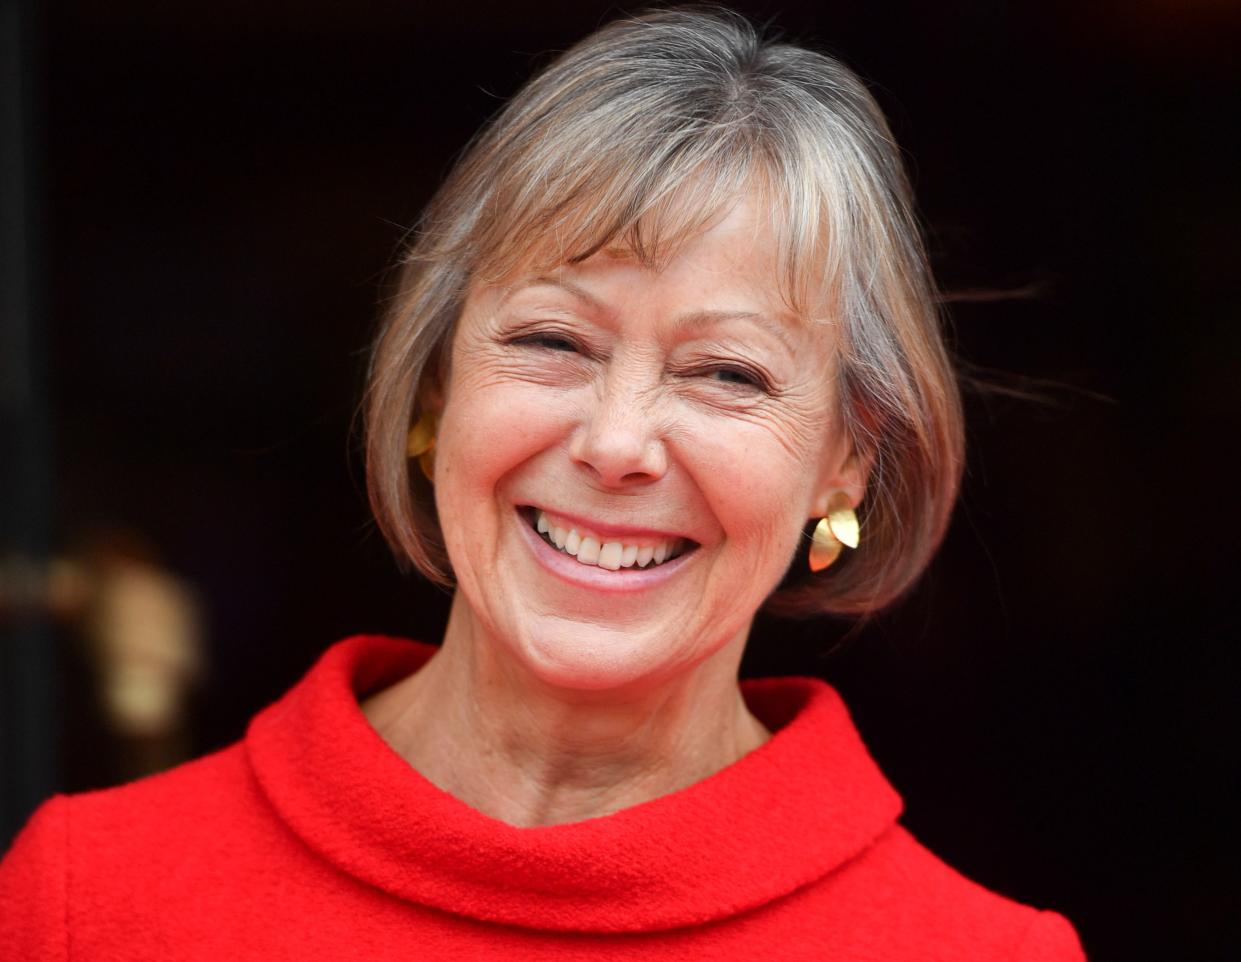 Jenny Agutter says she has earned the lines on her face. (Getty Images)